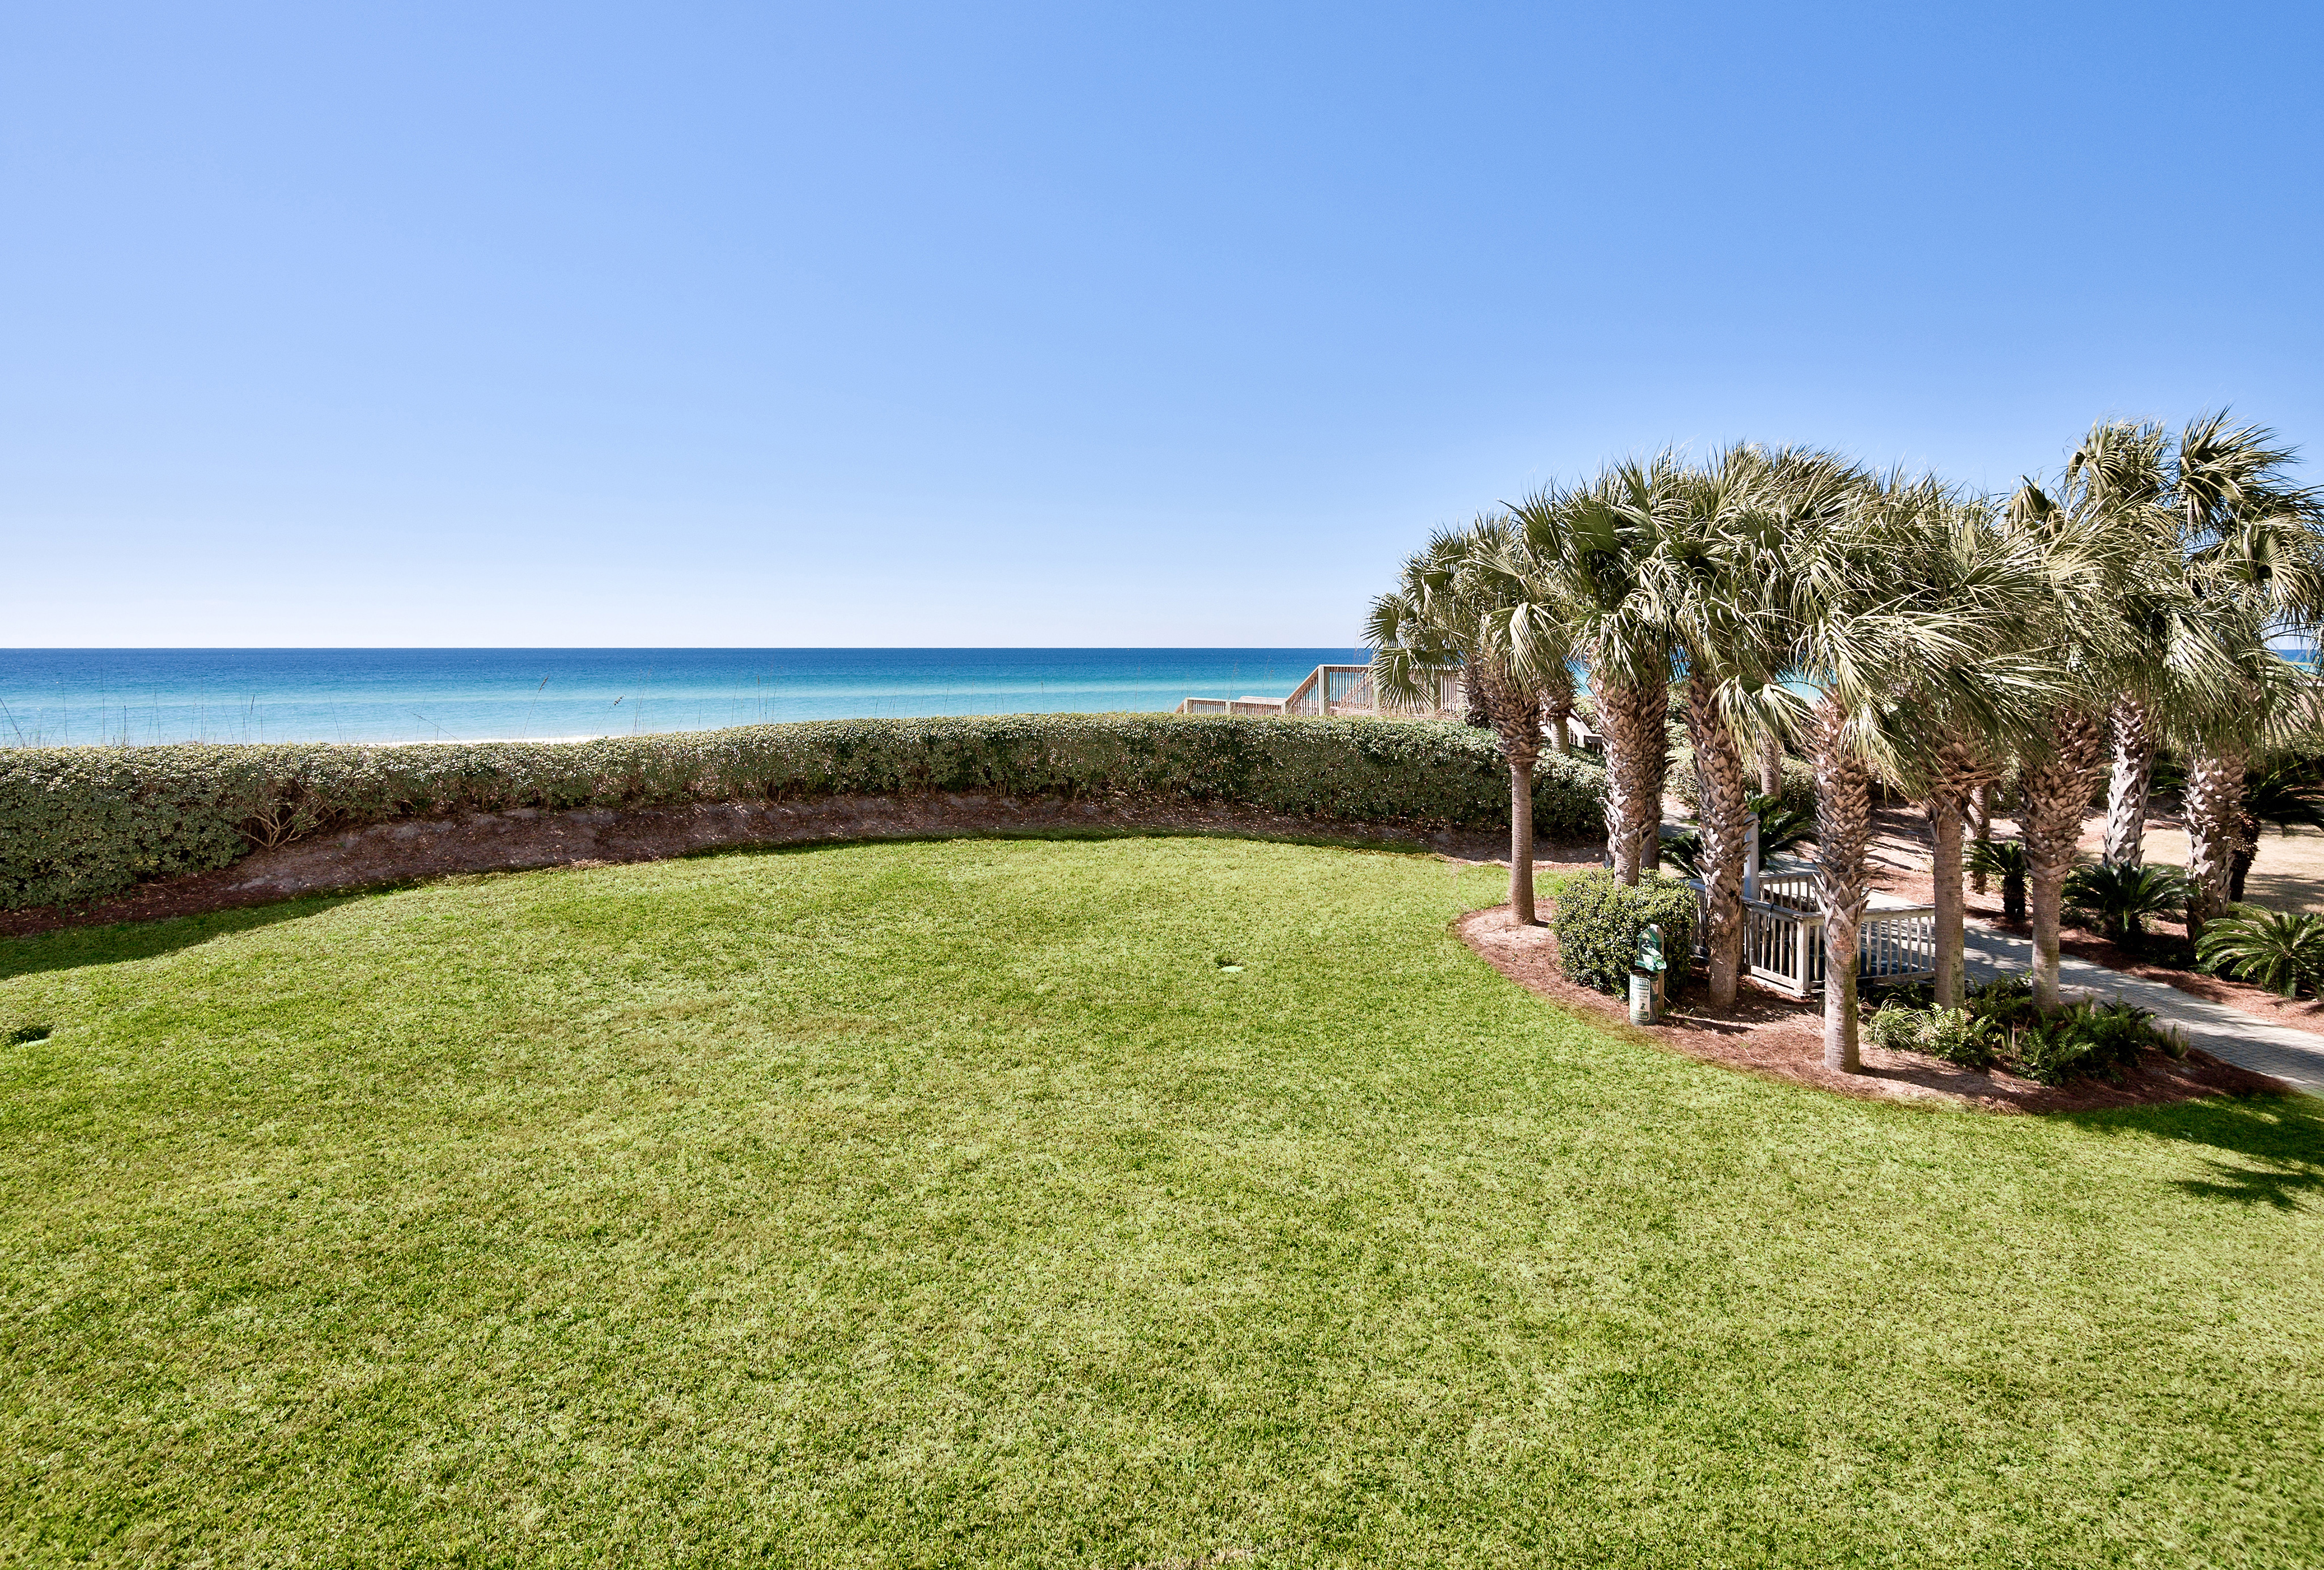 The landscaped lawn of one of Destin's Gulf front homes